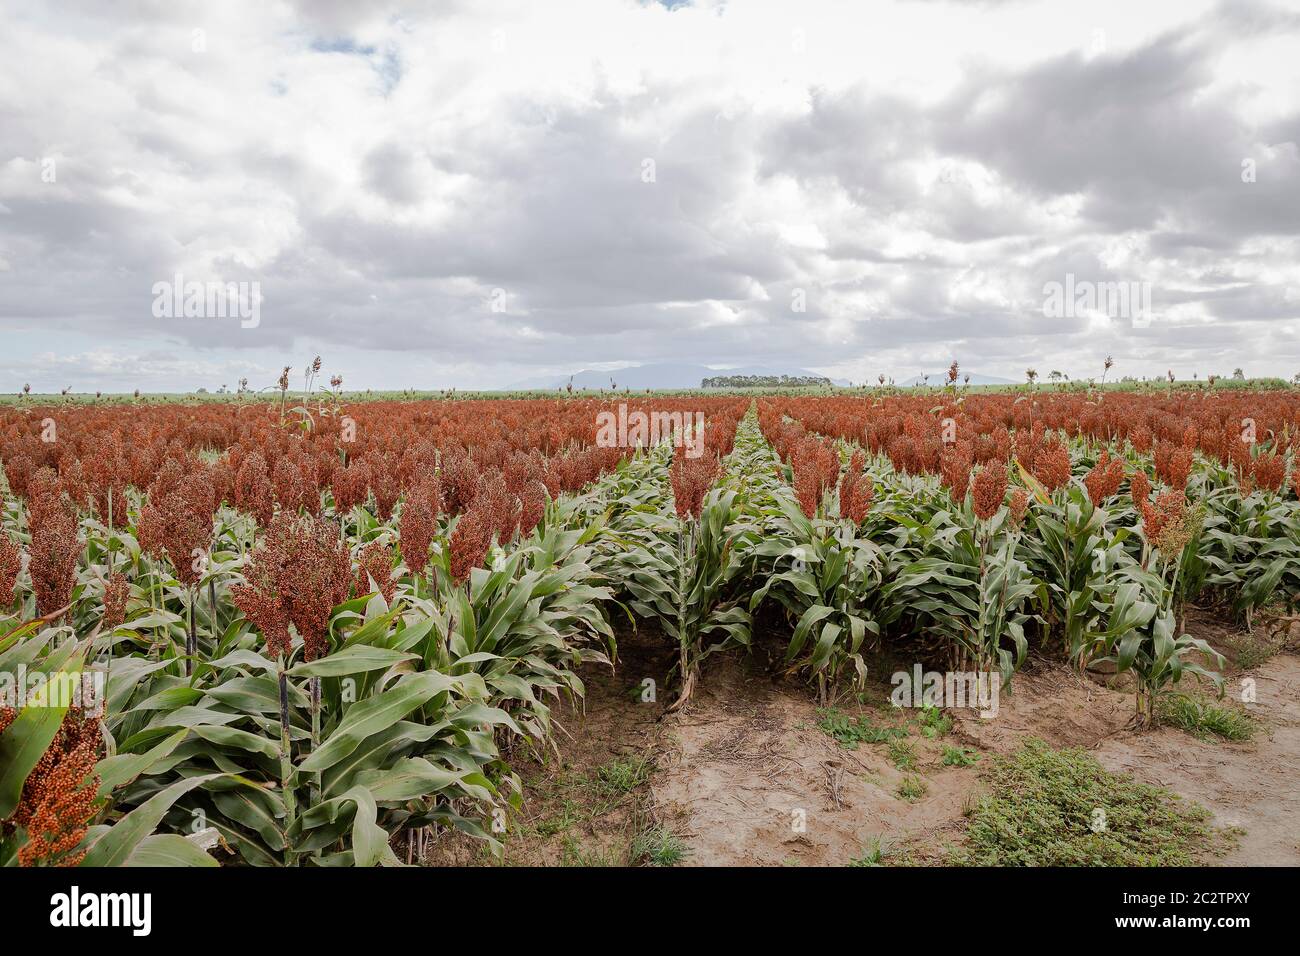 Crop of Sorghum with overcast sky Stock Photo